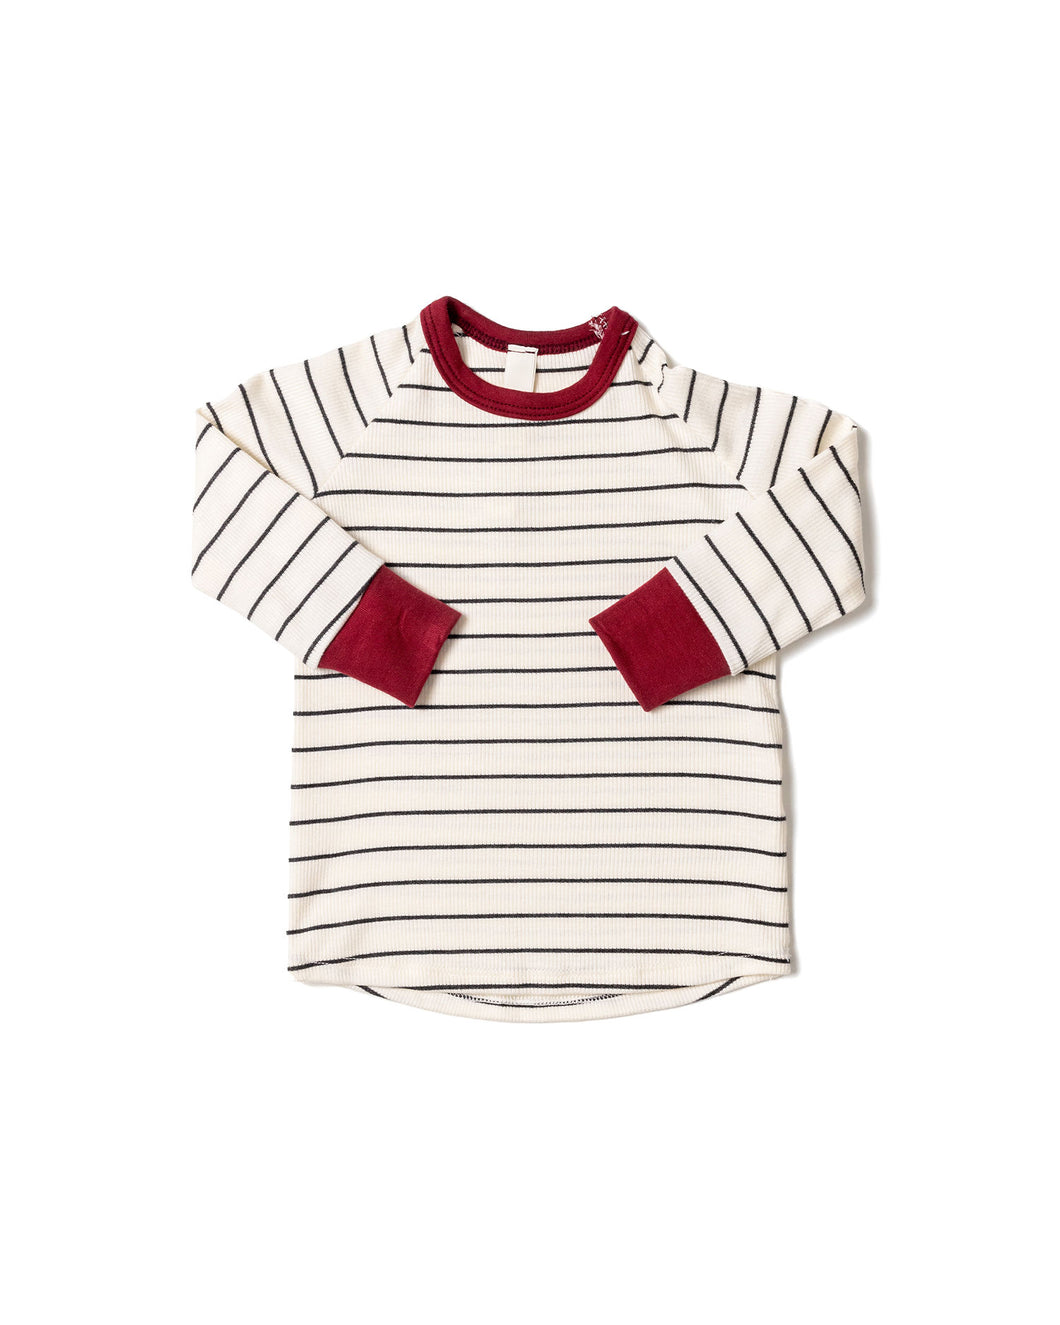 rib knit long sleeve tee - wide charcoal stripe stocking red contrast